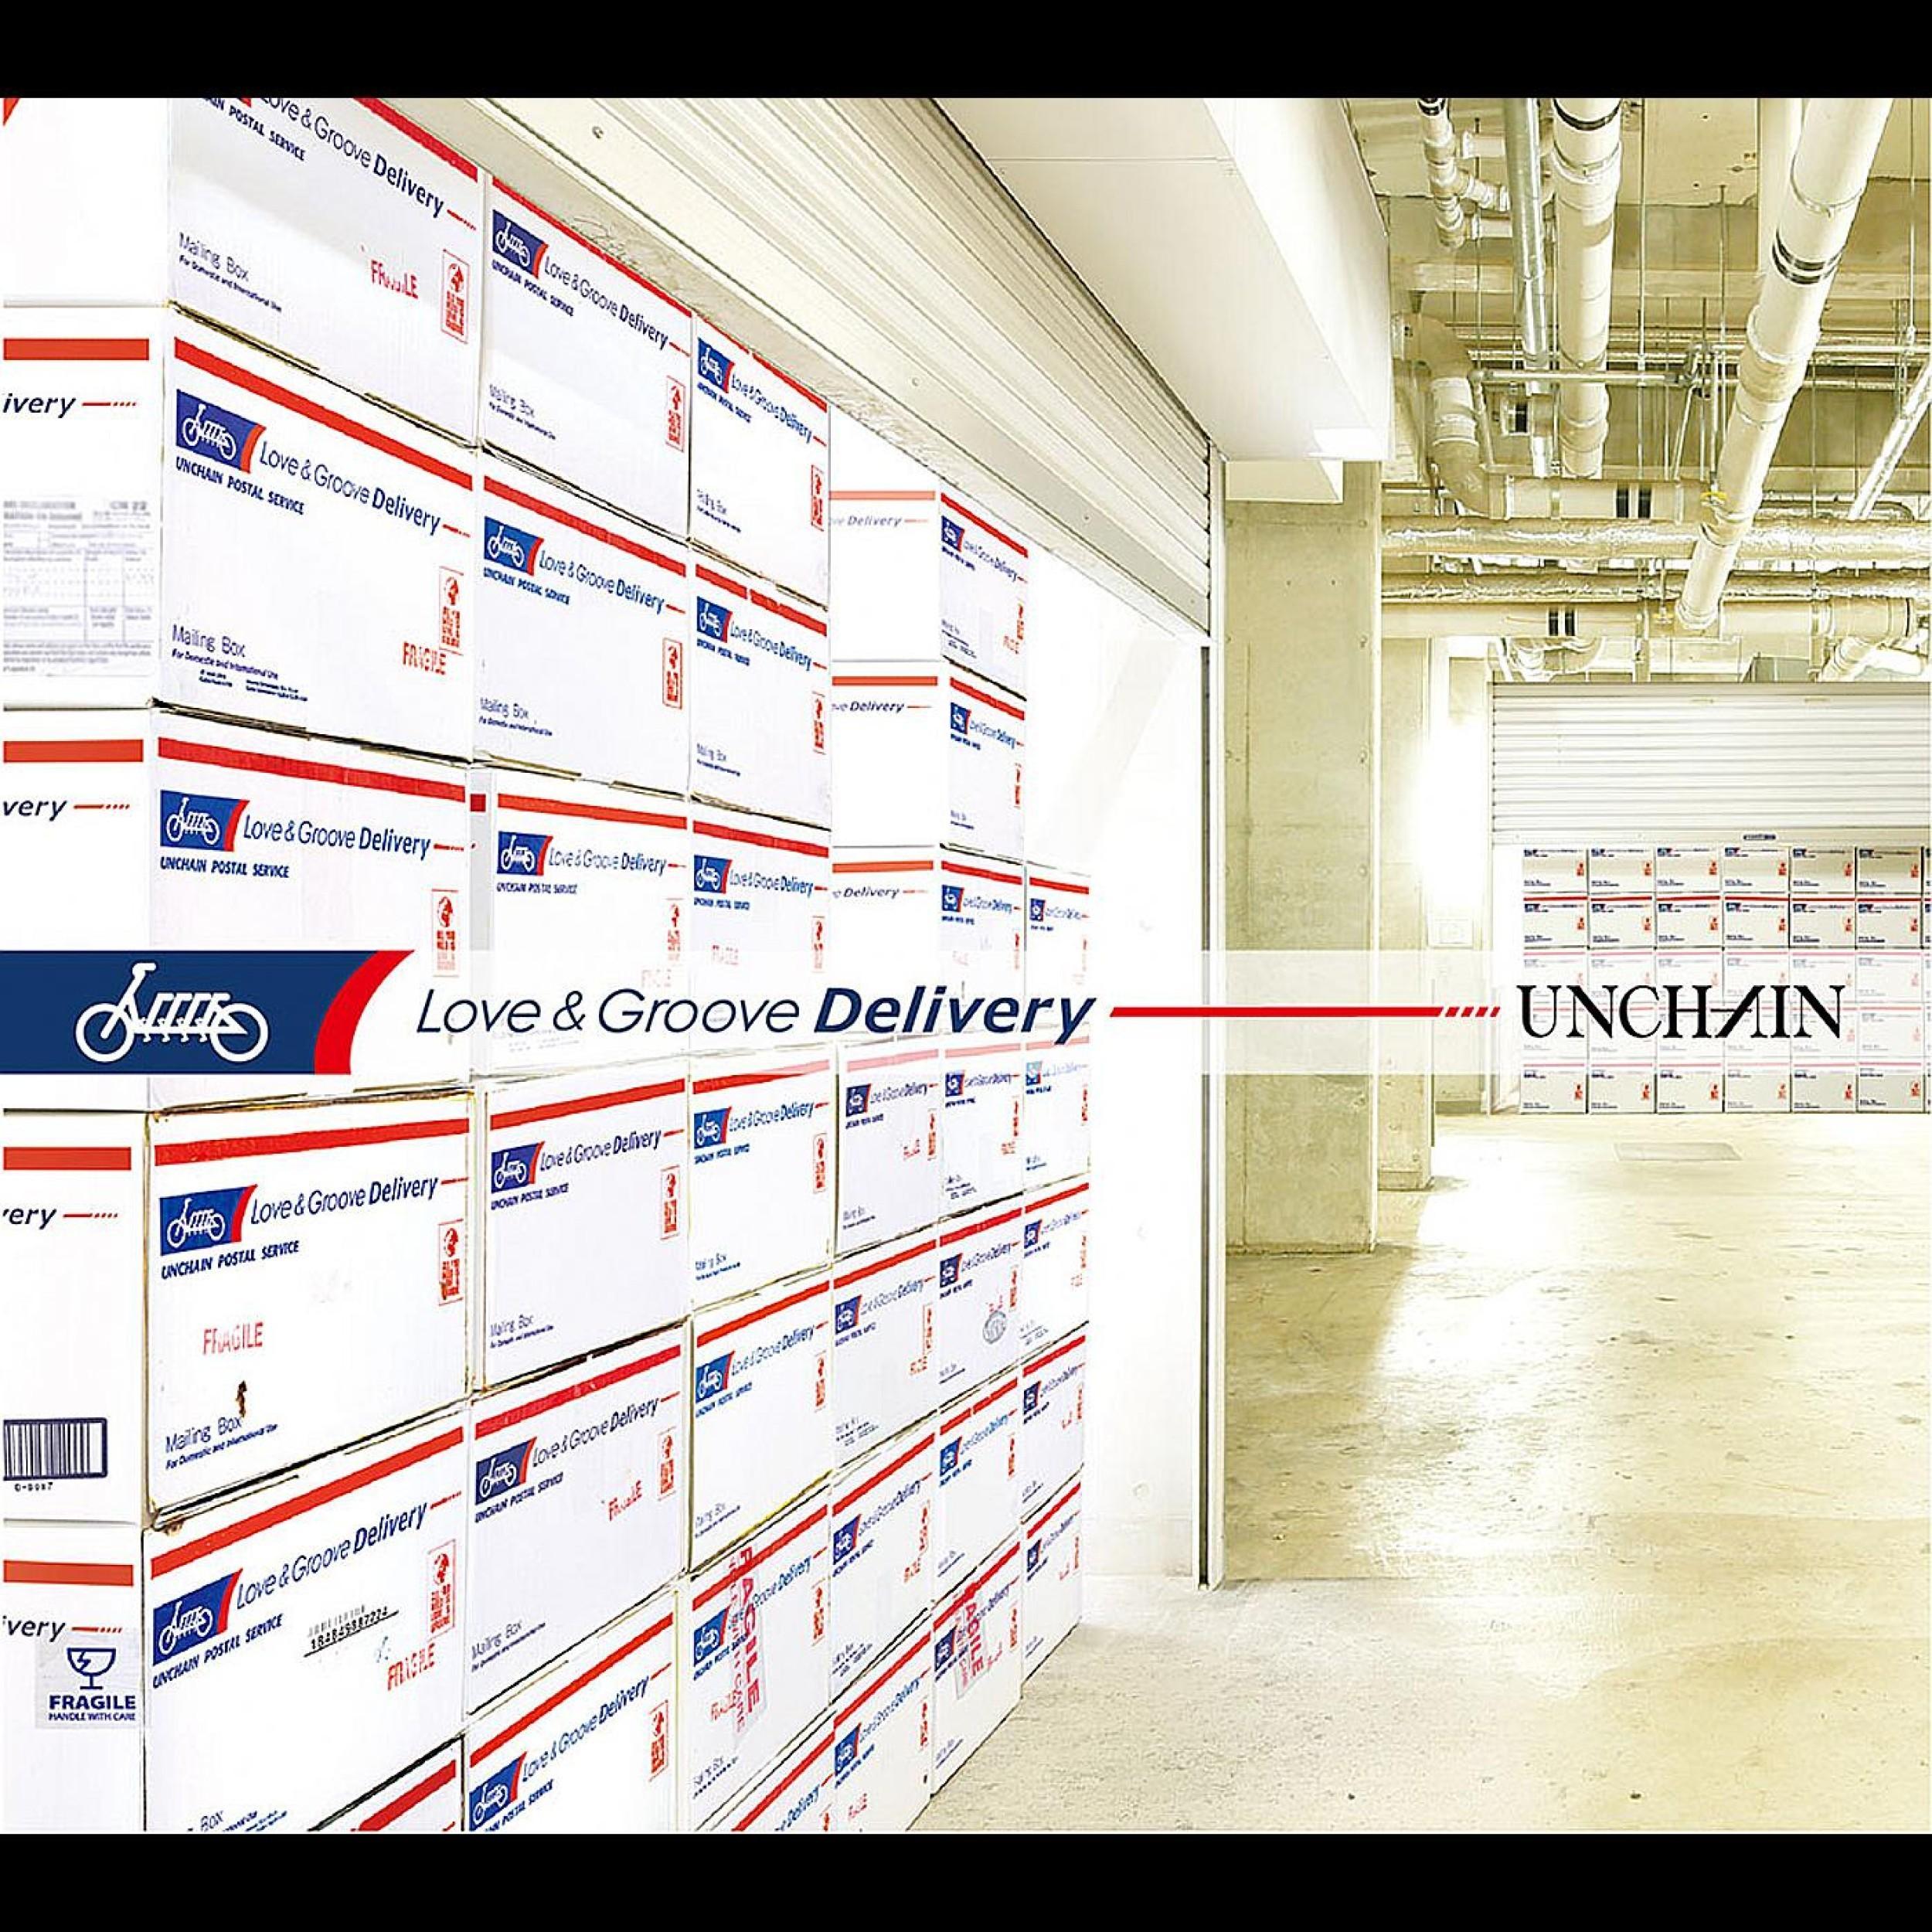 Love & Groove Delivery / UNCHAIN